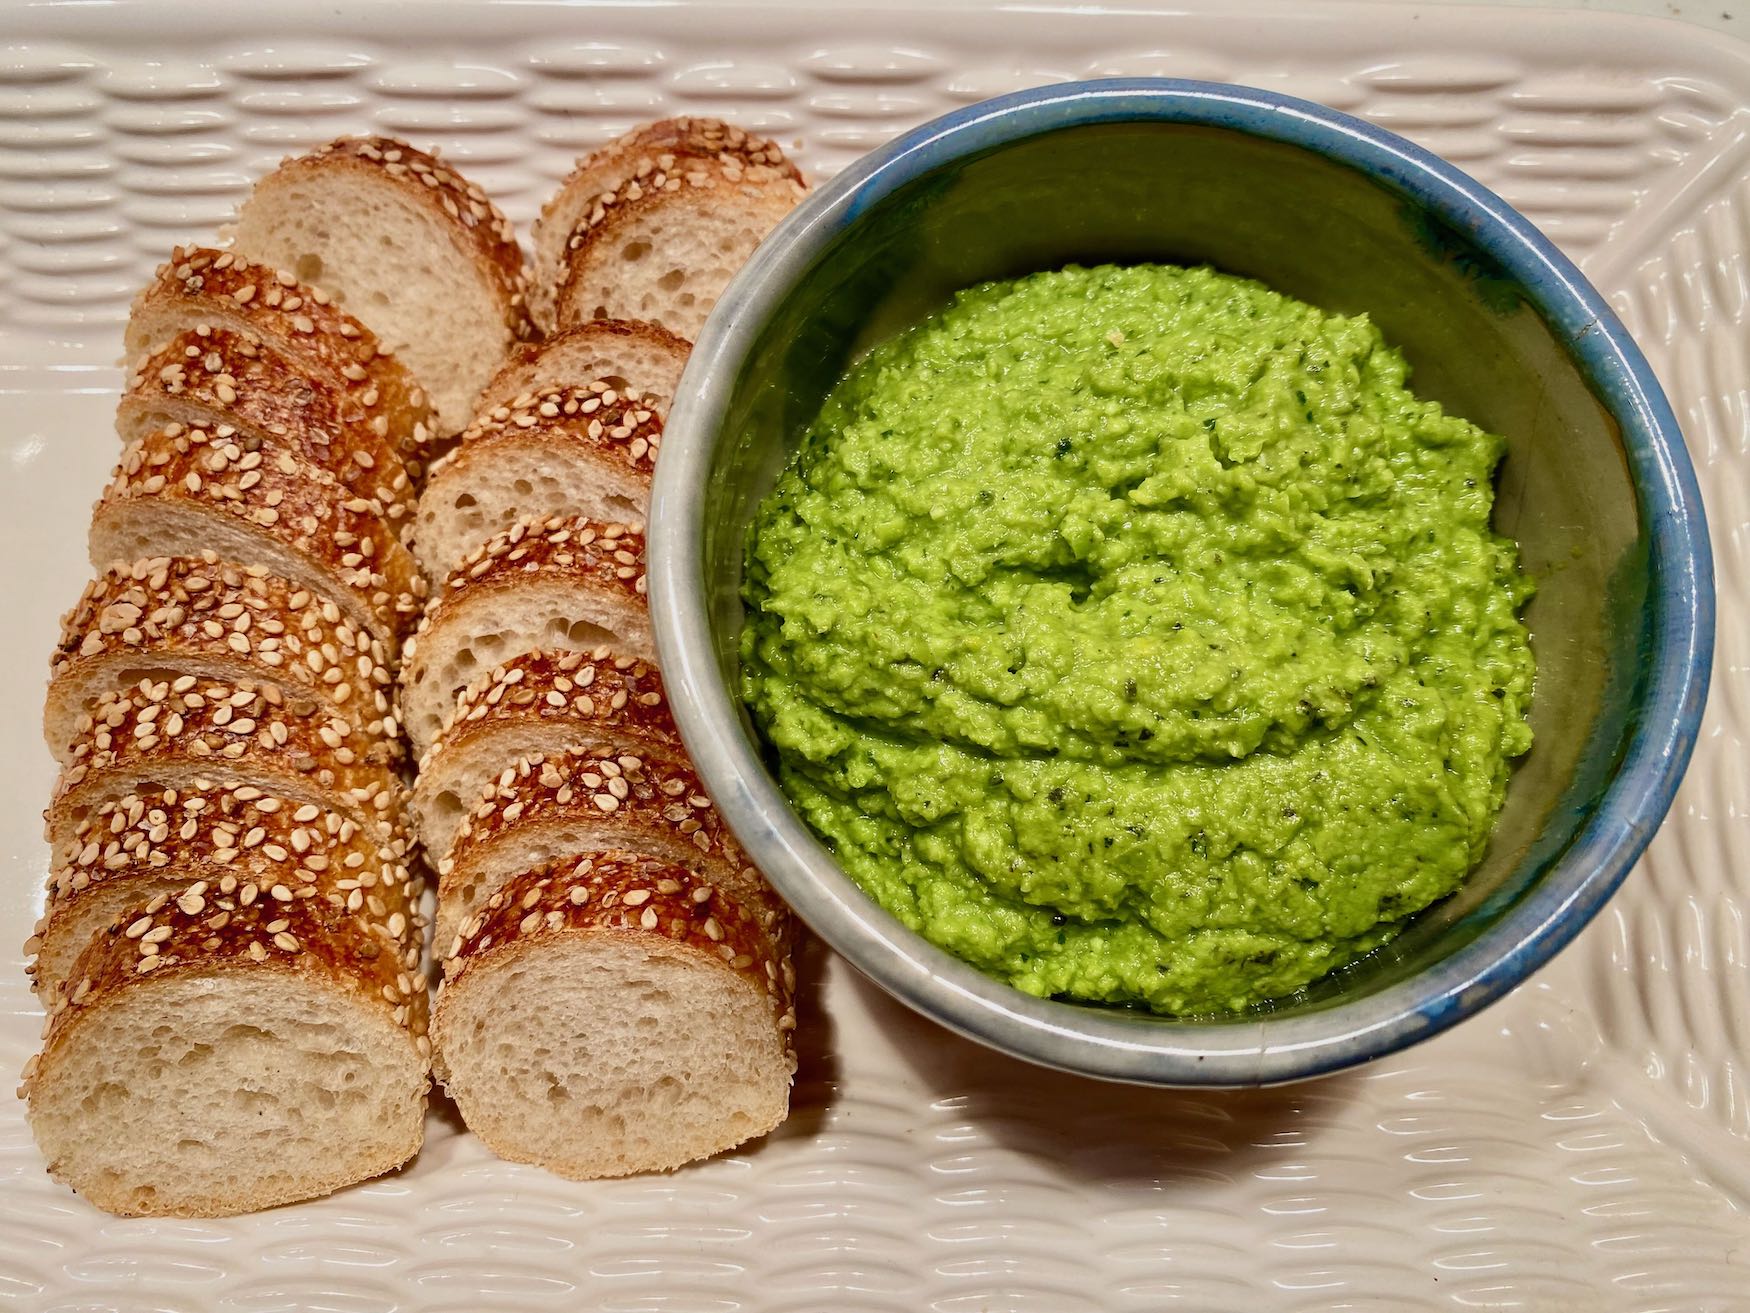 Baguette Slices and Pea Spread with Lemon, Garlic, and Mint